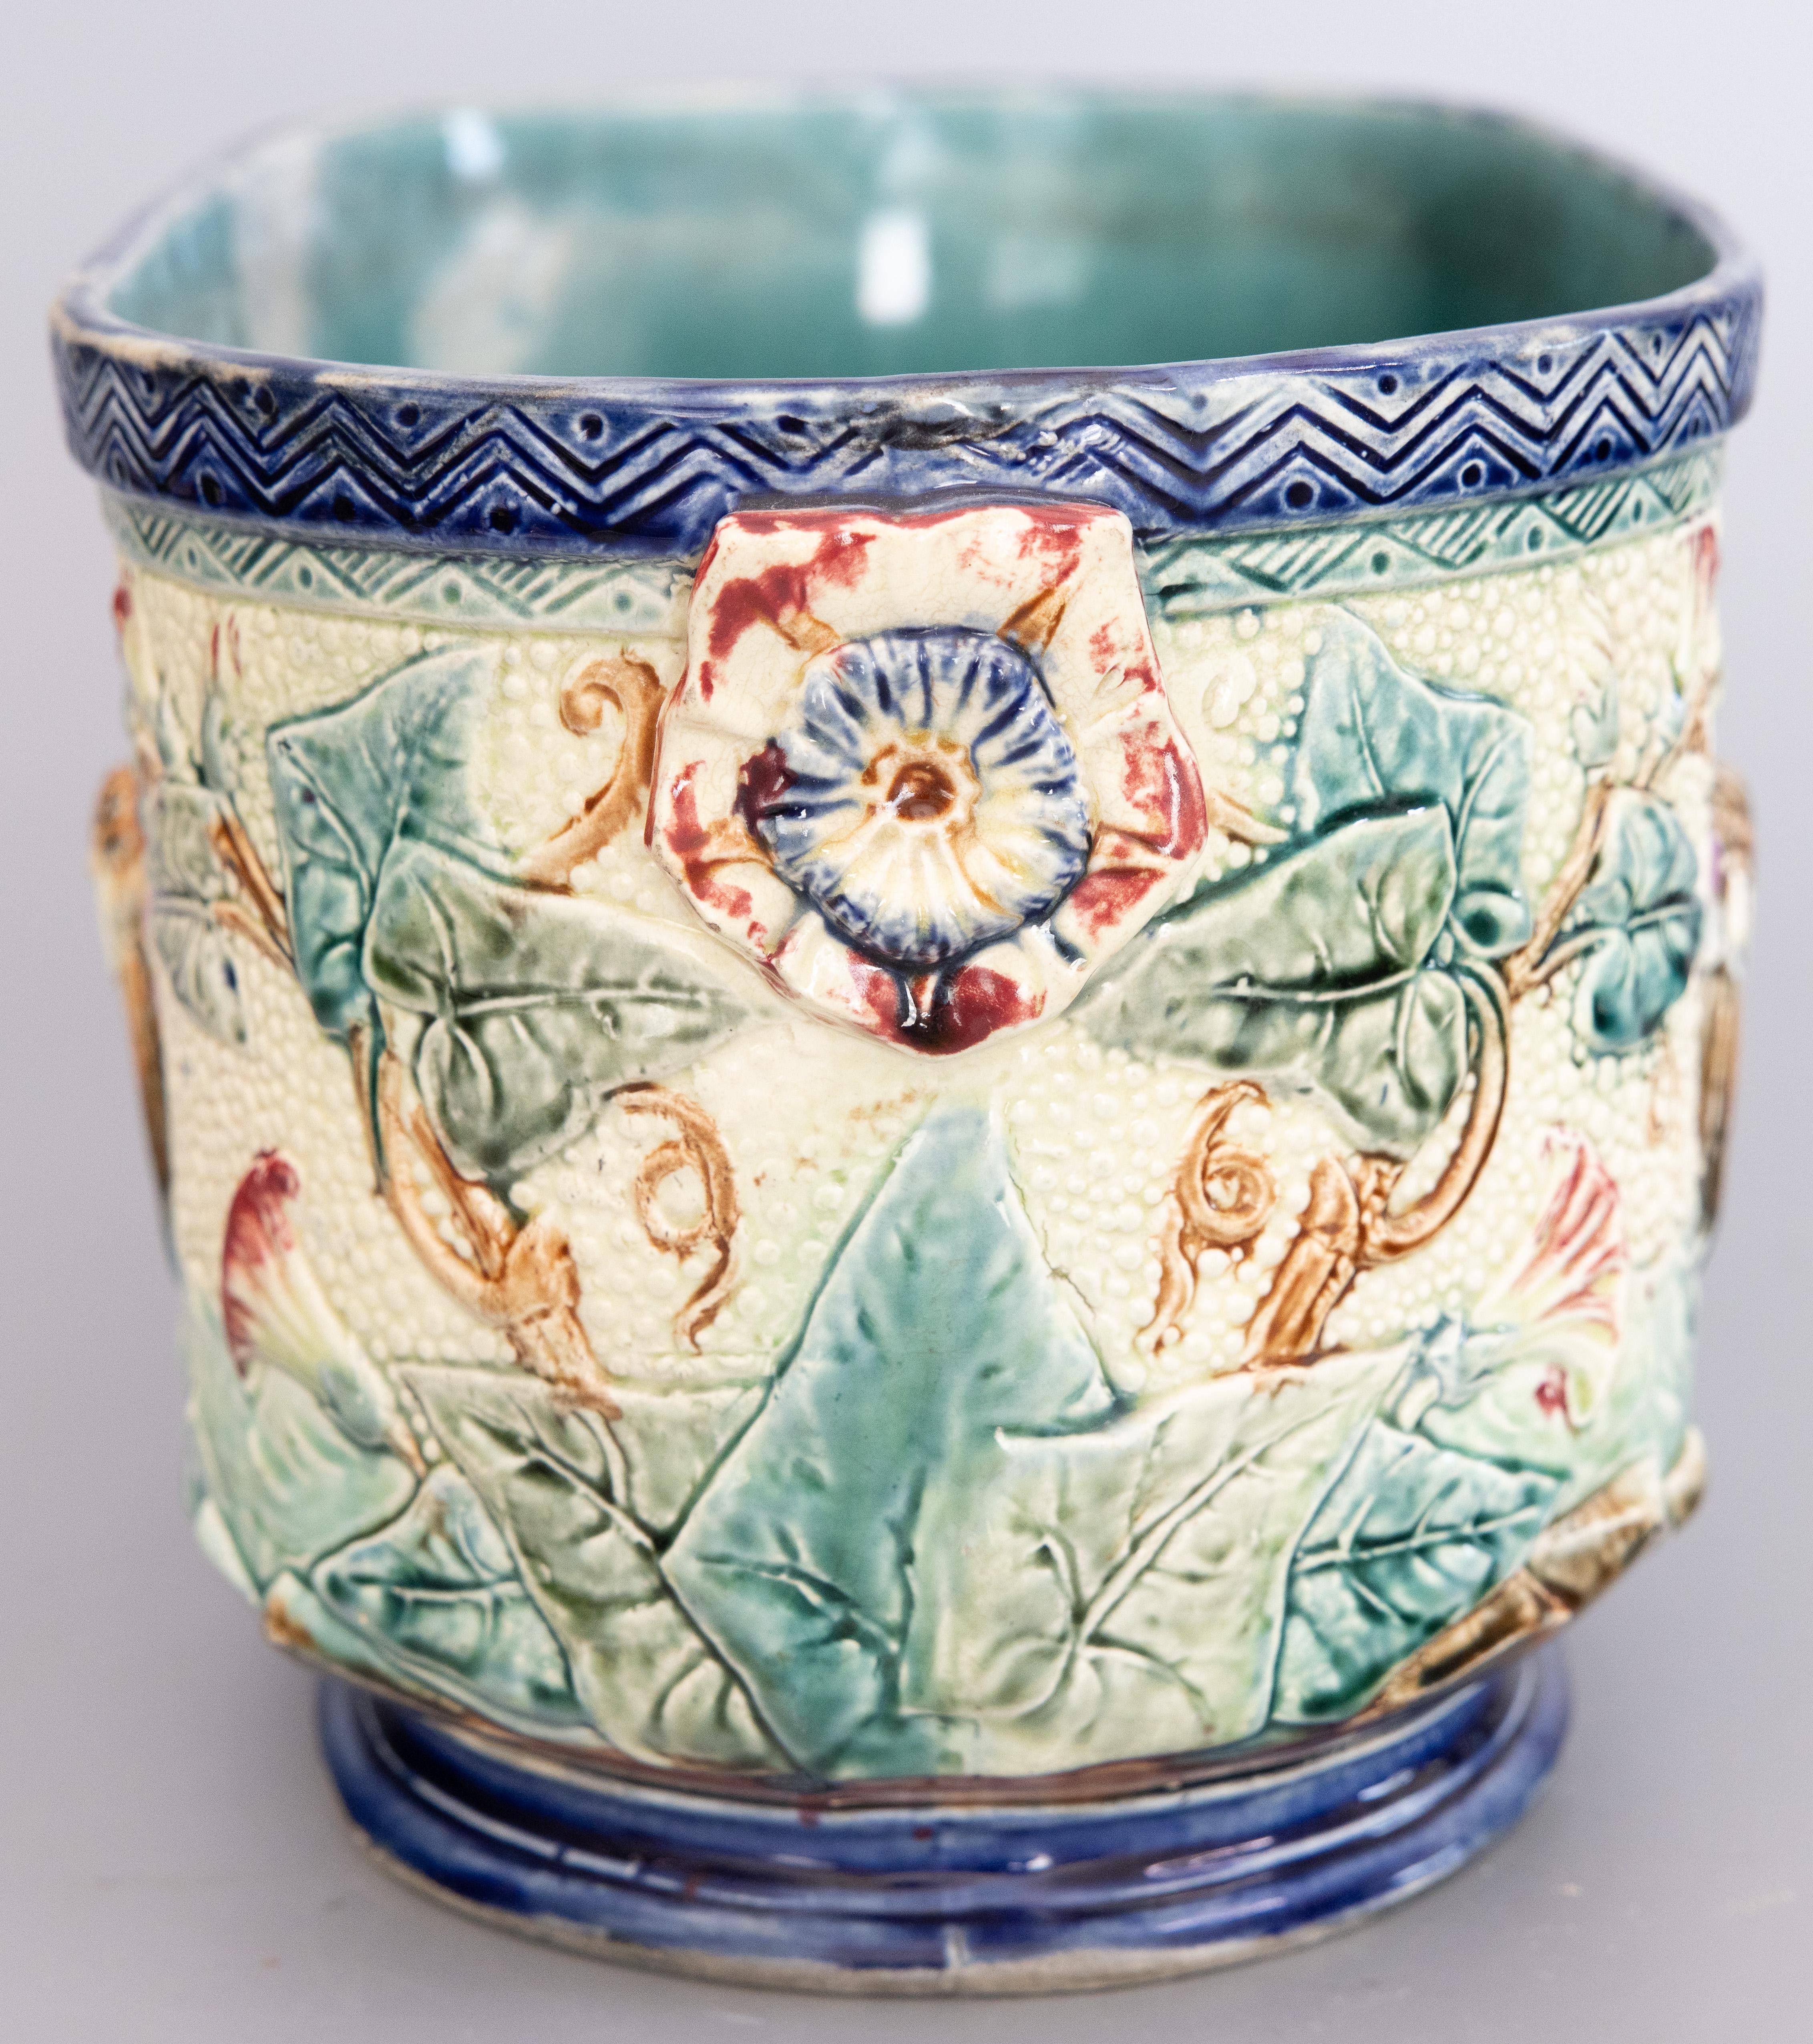 A lovely antique French majolica jardiniere / cachepot / planter, circa 1880. Maker's mark on reverse. This fine jardiniere is a nice large size with a drainage hole, hand painted with birds and a foliate design in gorgeous colors.

DIMENSIONS
16ʺW